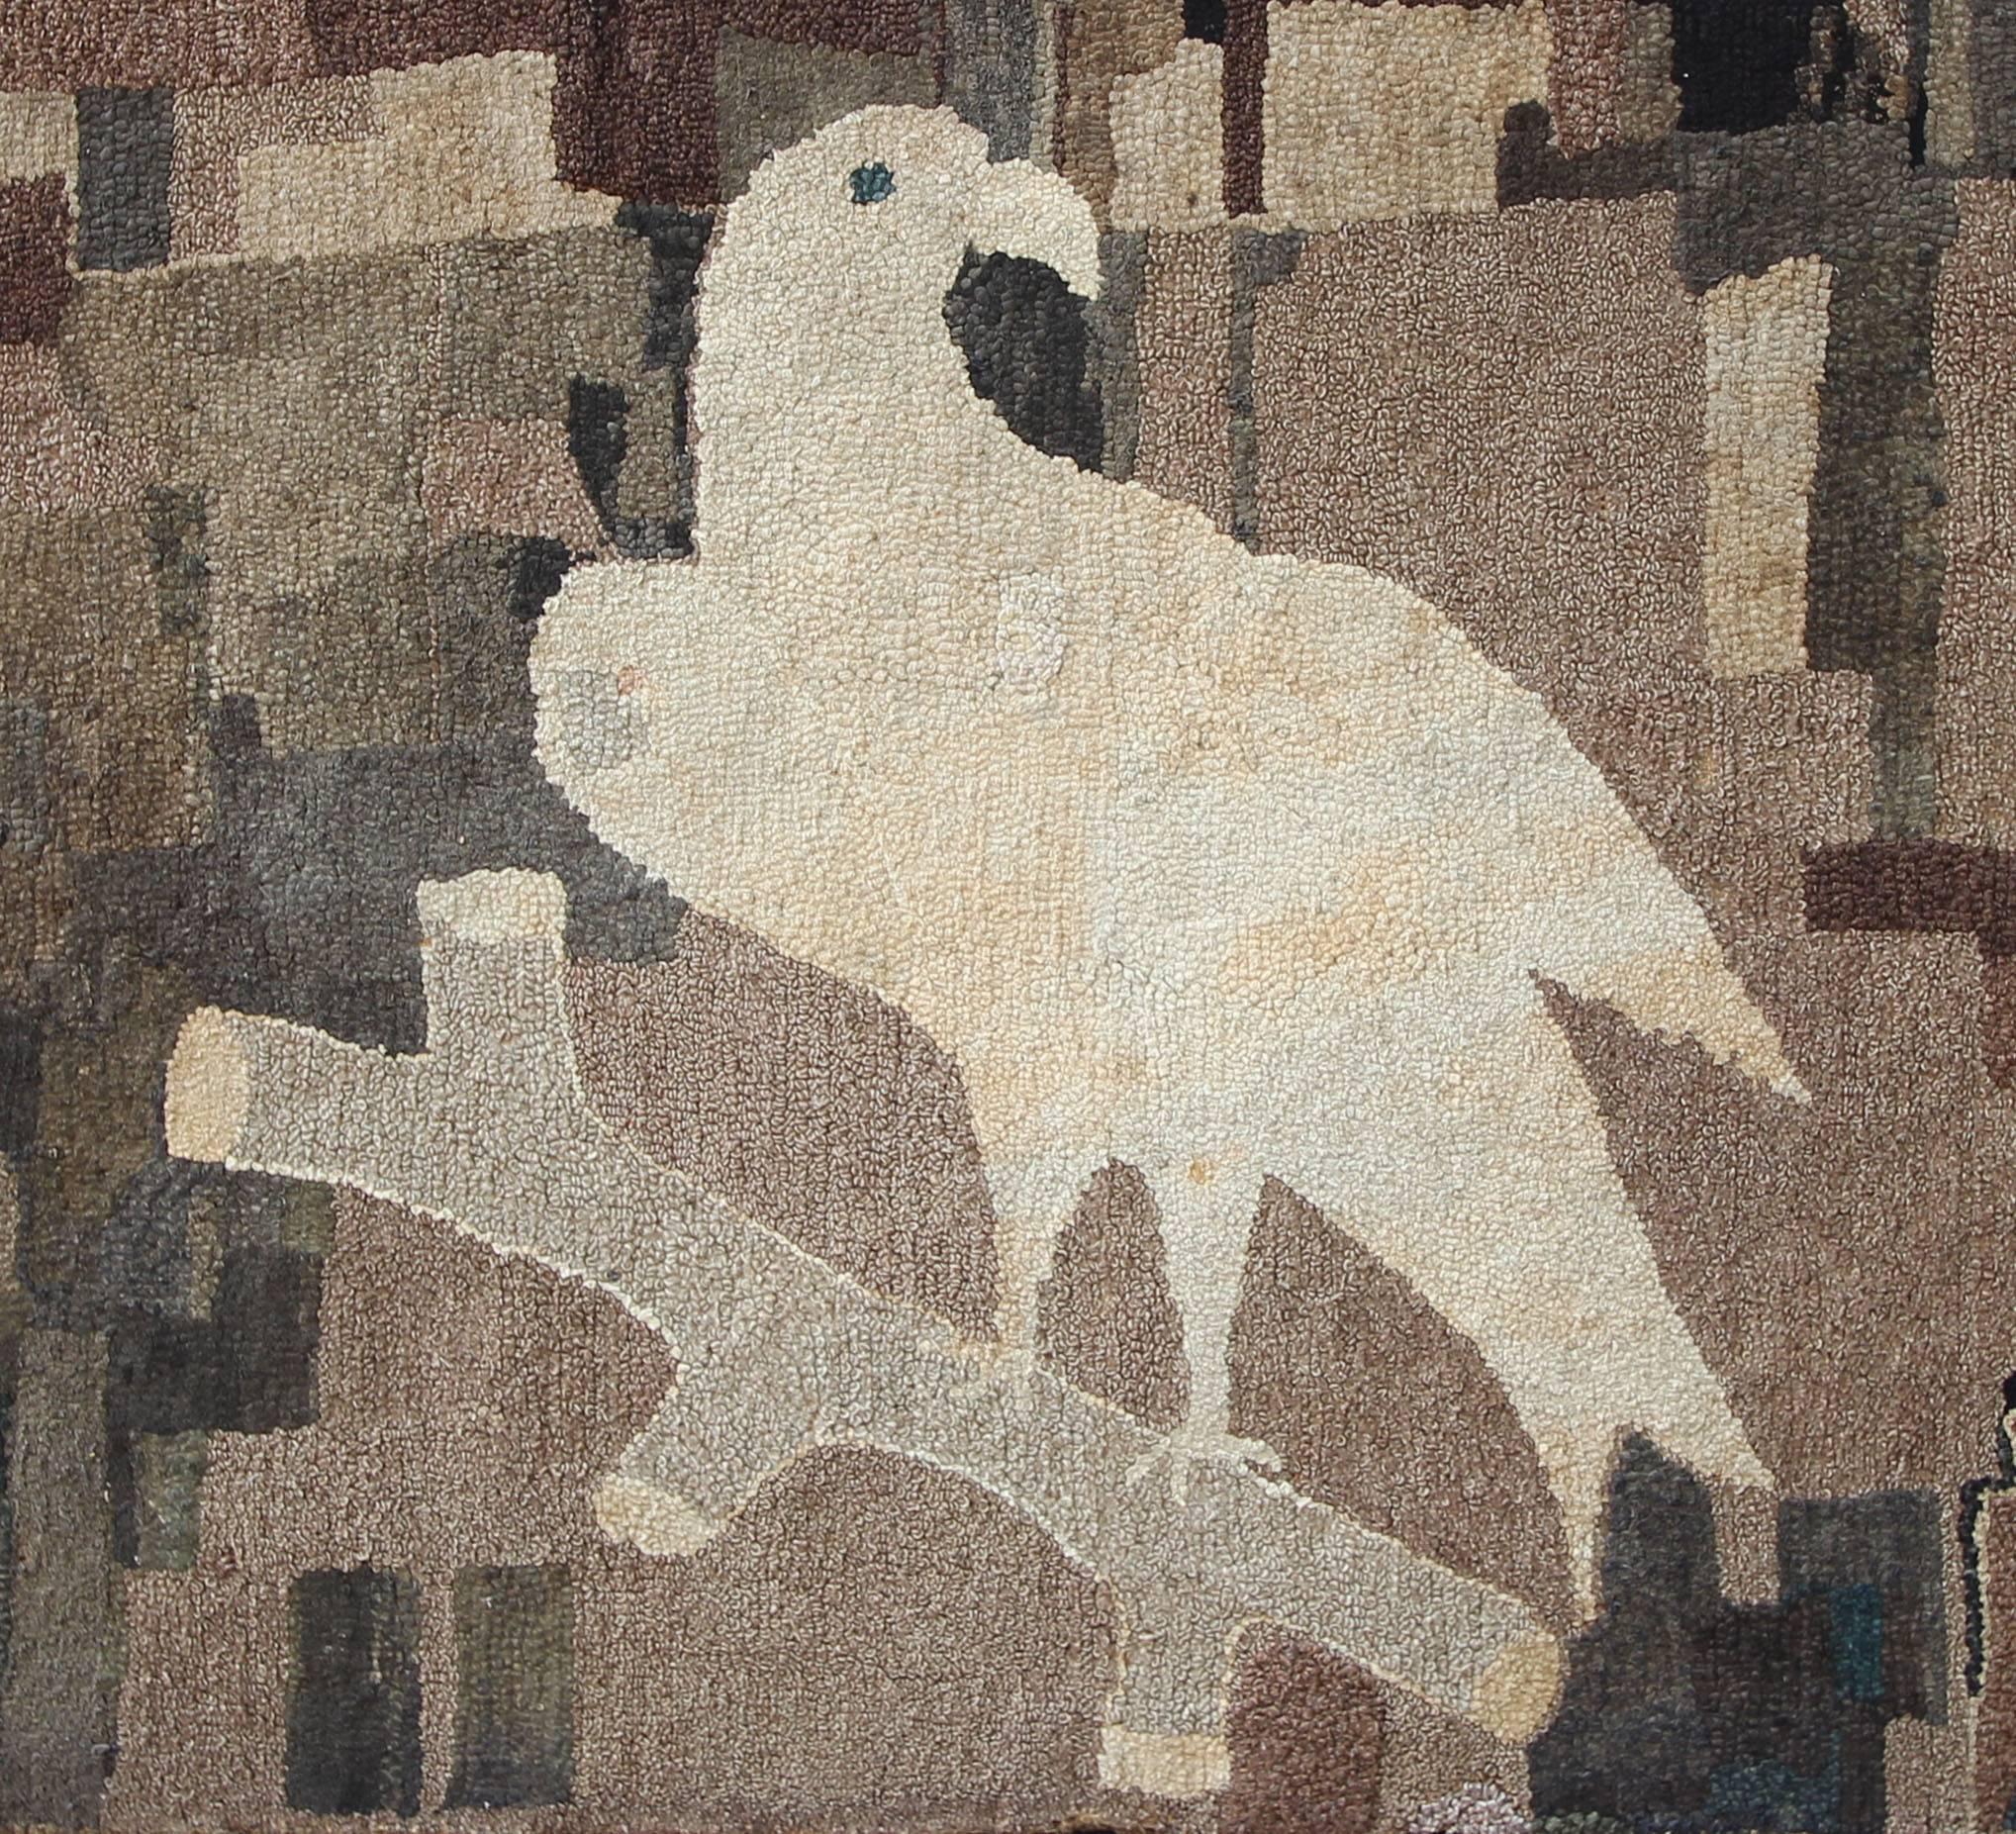 Large and outstanding folk art hooked rug featuring a perched eagle, against an abstract field and in neutral colors. An excellent, strong presence to the eagle and to rug as a whole. Professionally mounted on black fabric and on a custom built